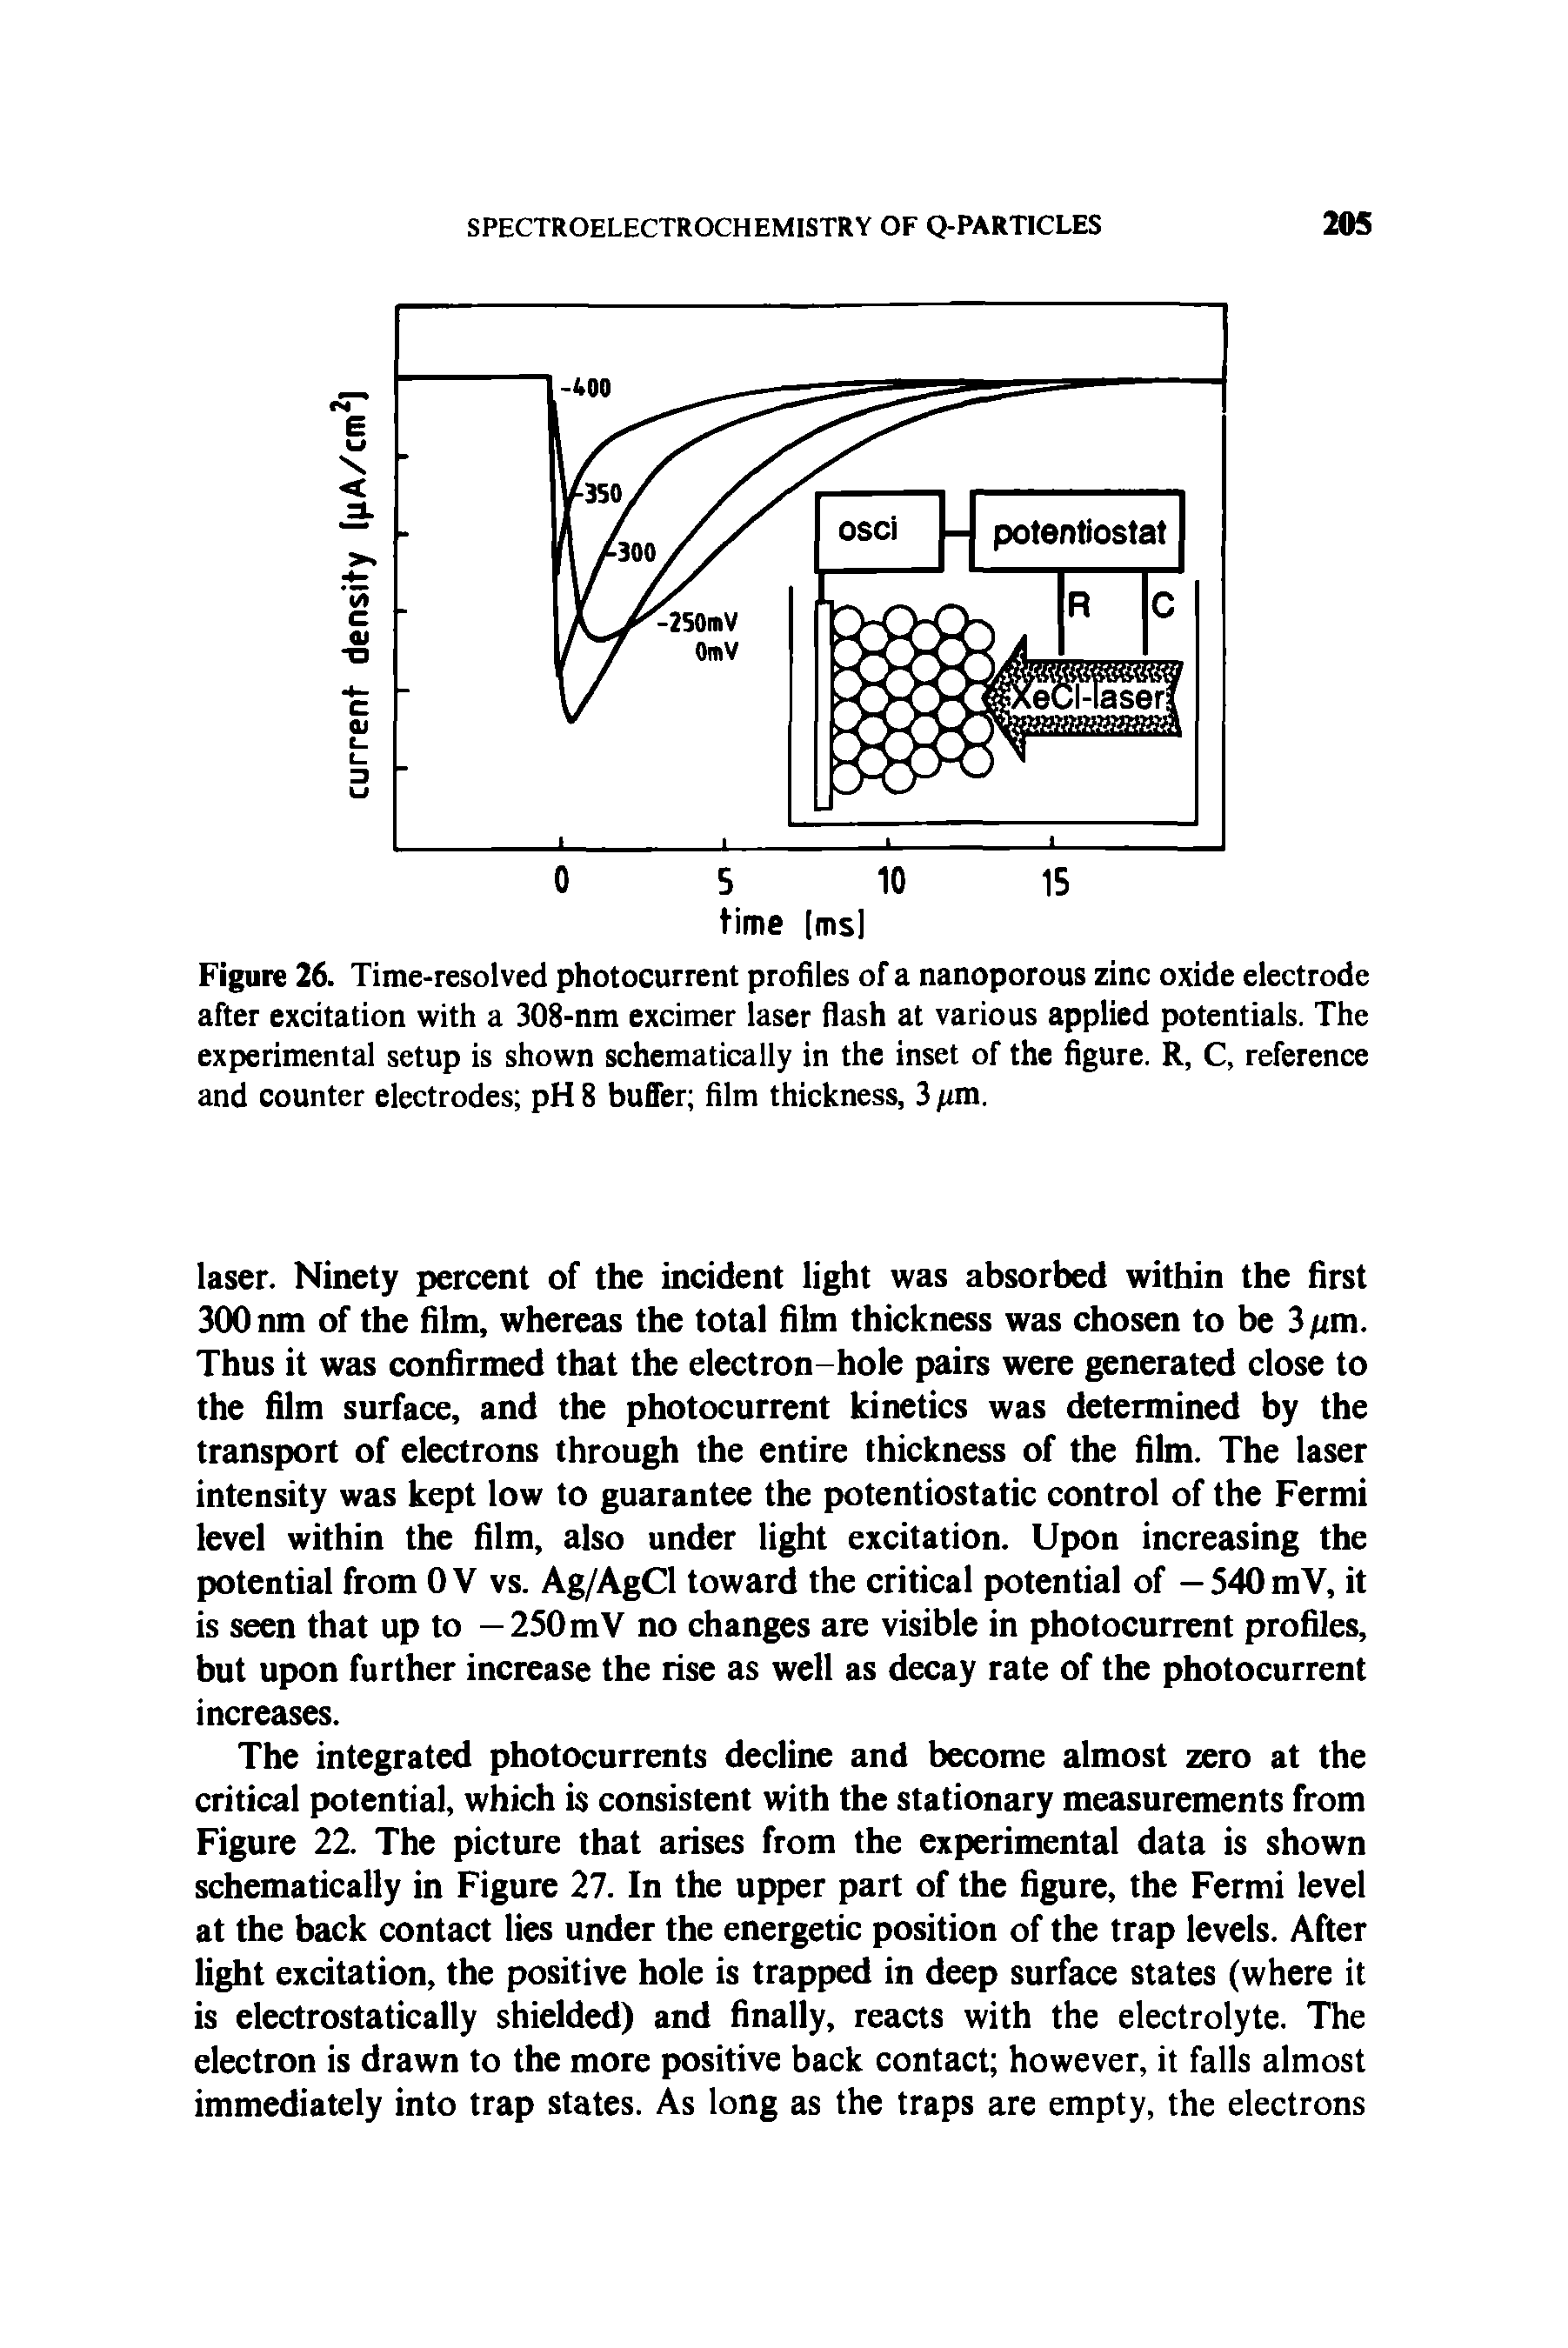 Figure 26. Time-resolved photocurrent profiles of a nanoporous zinc oxide electrode after excitation with a 308-nm excimer laser flash at various applied potentials. The experimental setup is shown schematically in the inset of the figure. R, C, reference and counter electrodes pH 8 buffer film thickness, 3...